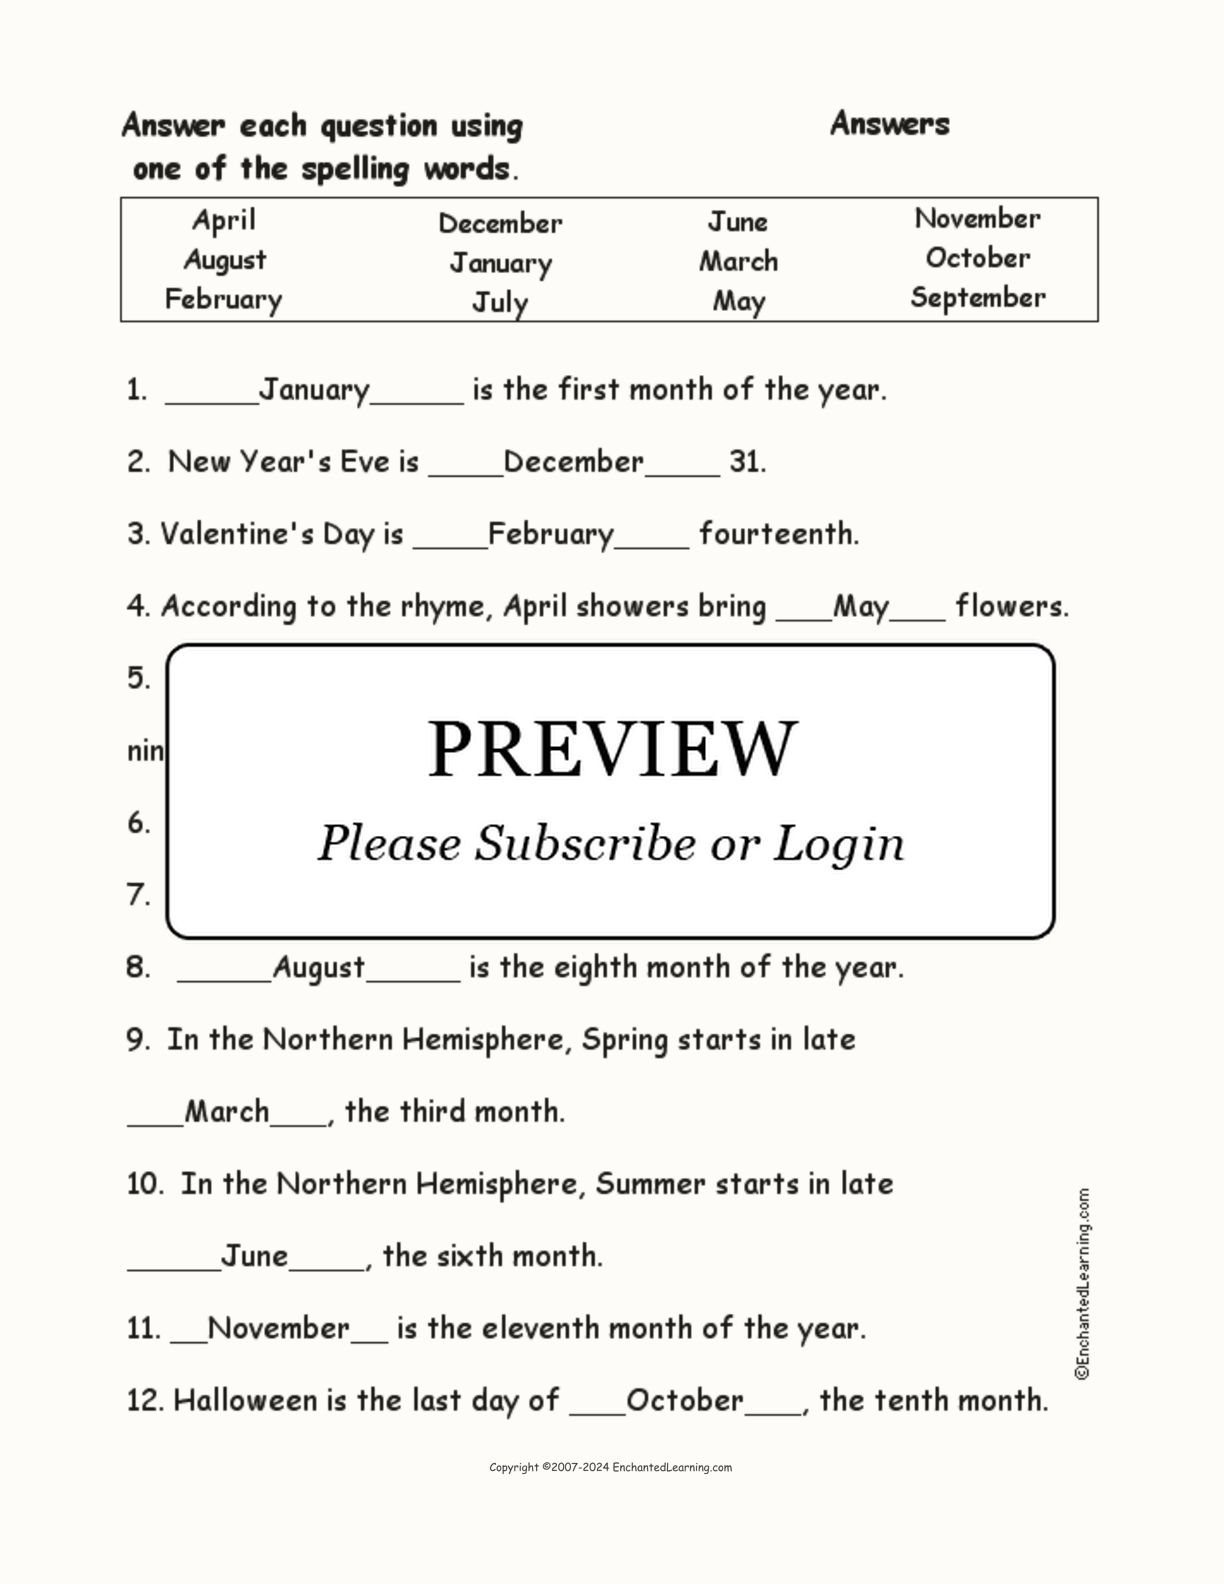 The Months: Spelling Word Questions interactive worksheet page 2